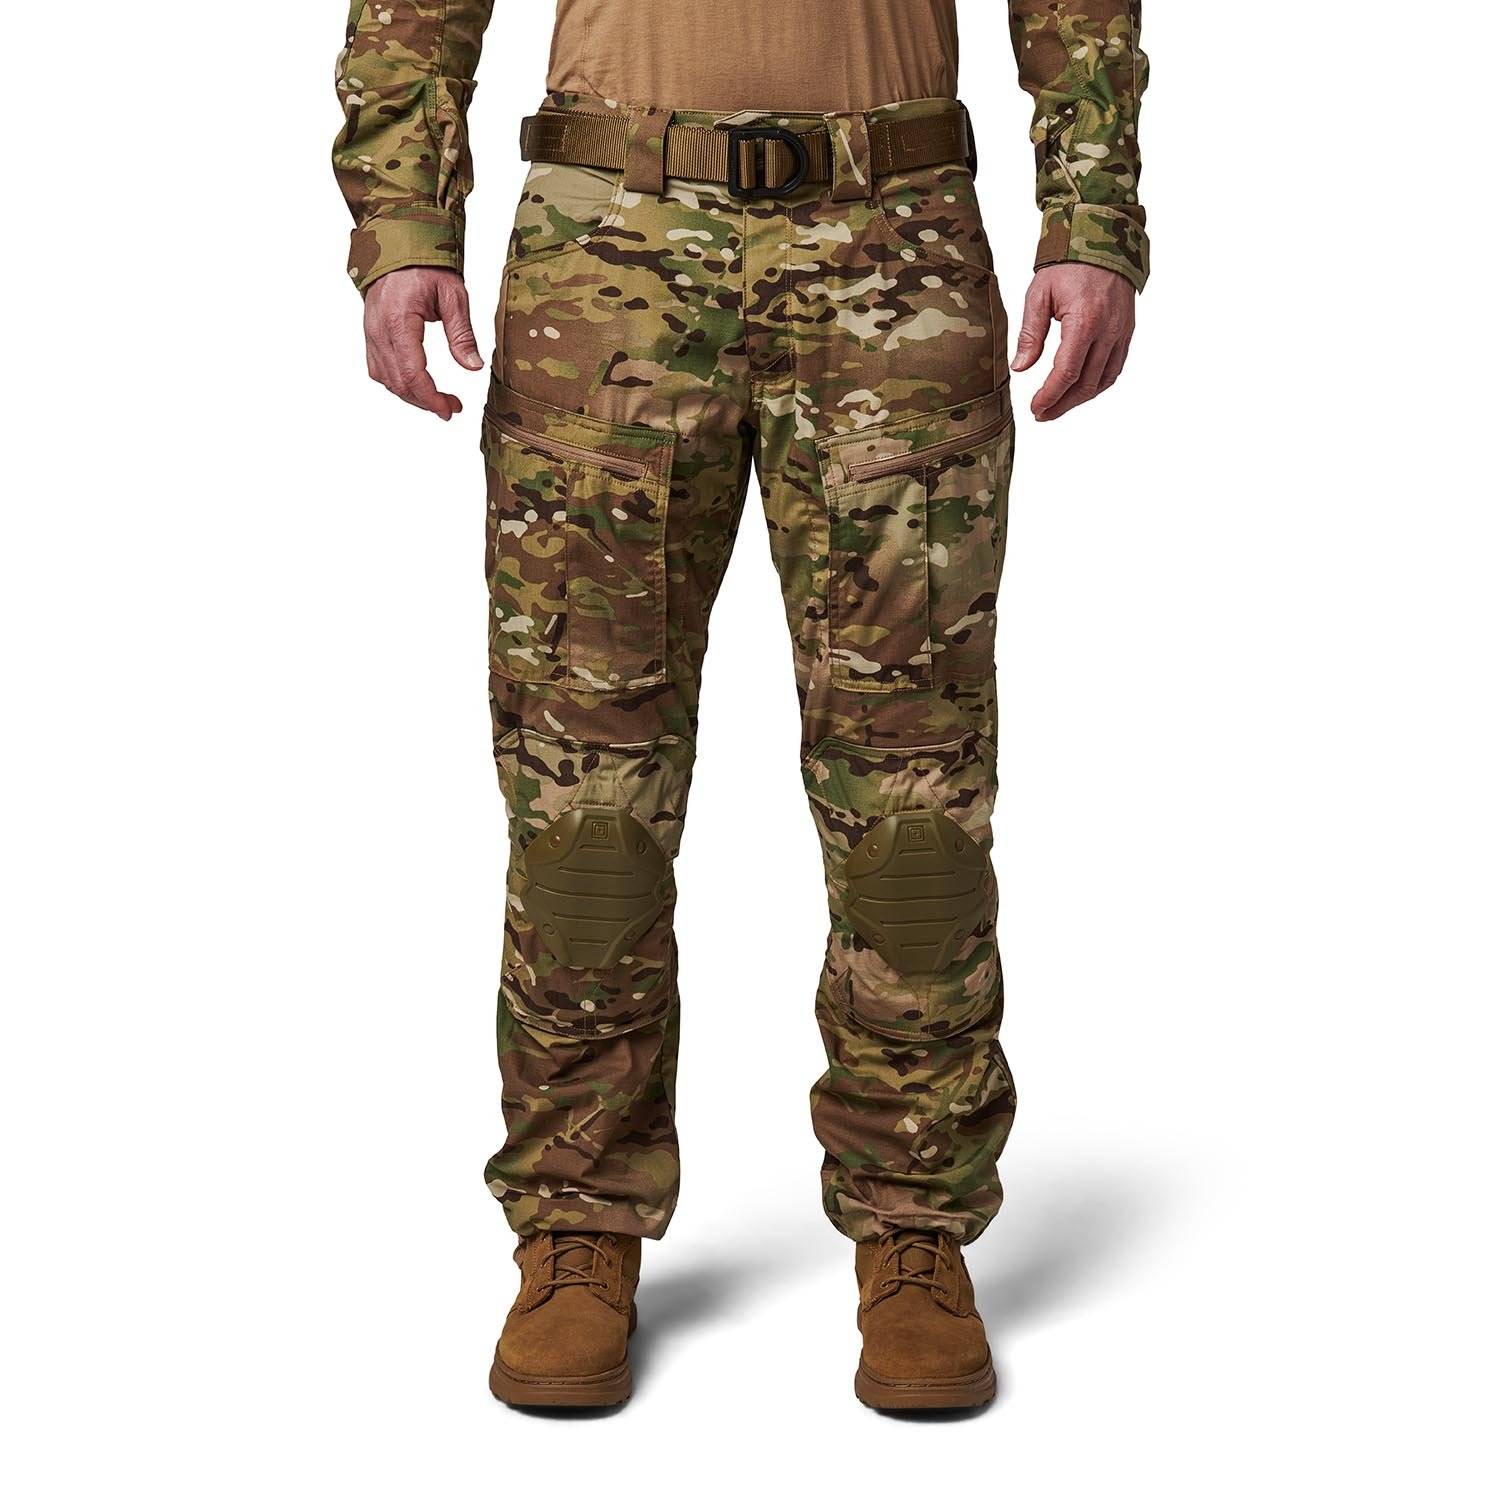 Propper Men's Lightweight Tactical Pant Bestselling nine-pocket design, in  three high-performance fabrics with a relaxed fit. Perform with efficiency  in the most demanding situations. The Propper Men's Tactical Pant features  a low-profile